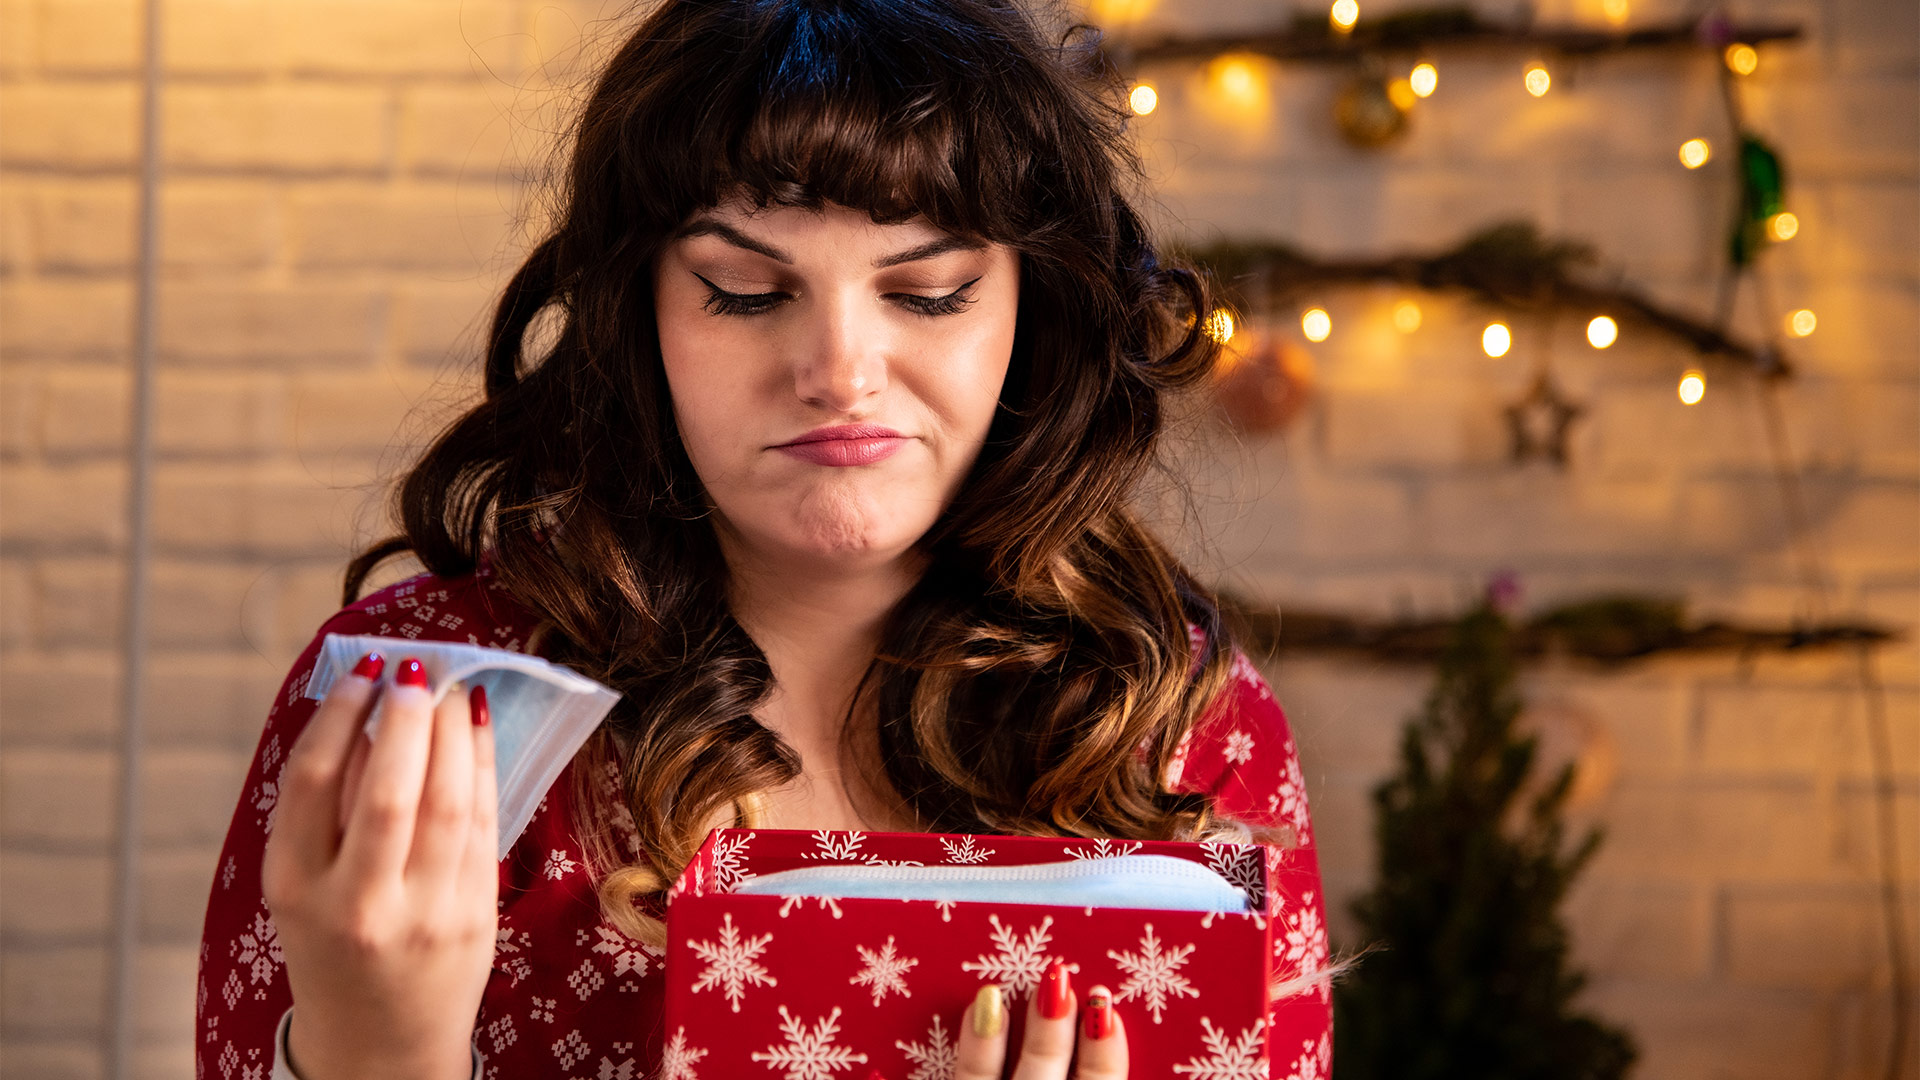 Woman looks disappointed after opening wrapped present. 